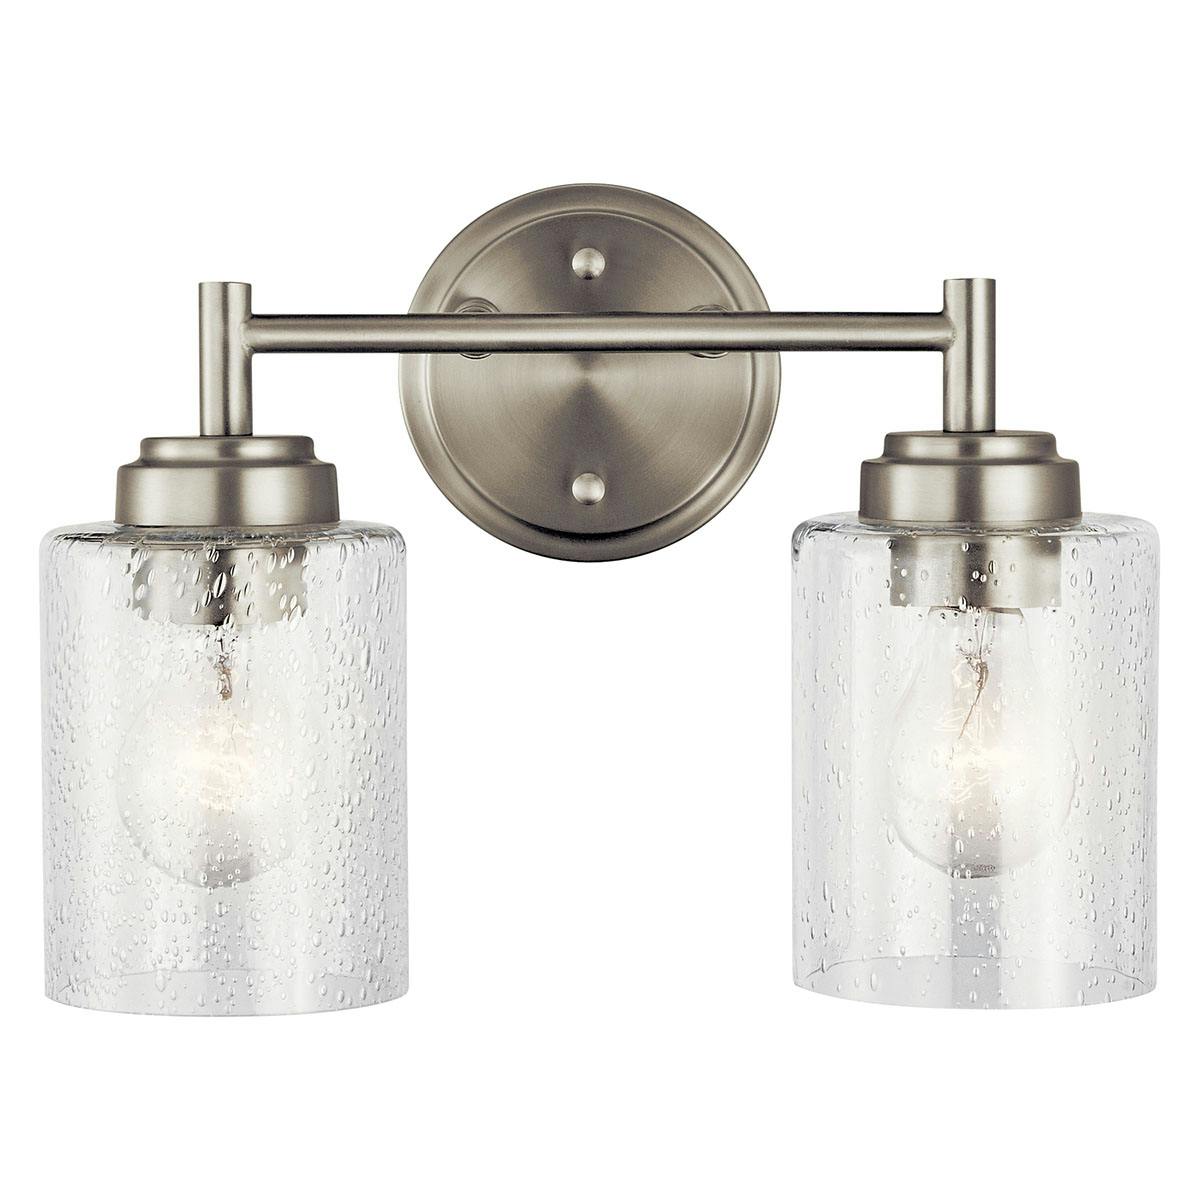 The Winslow 2 Light Vanity Light Nickel facing down on a white background